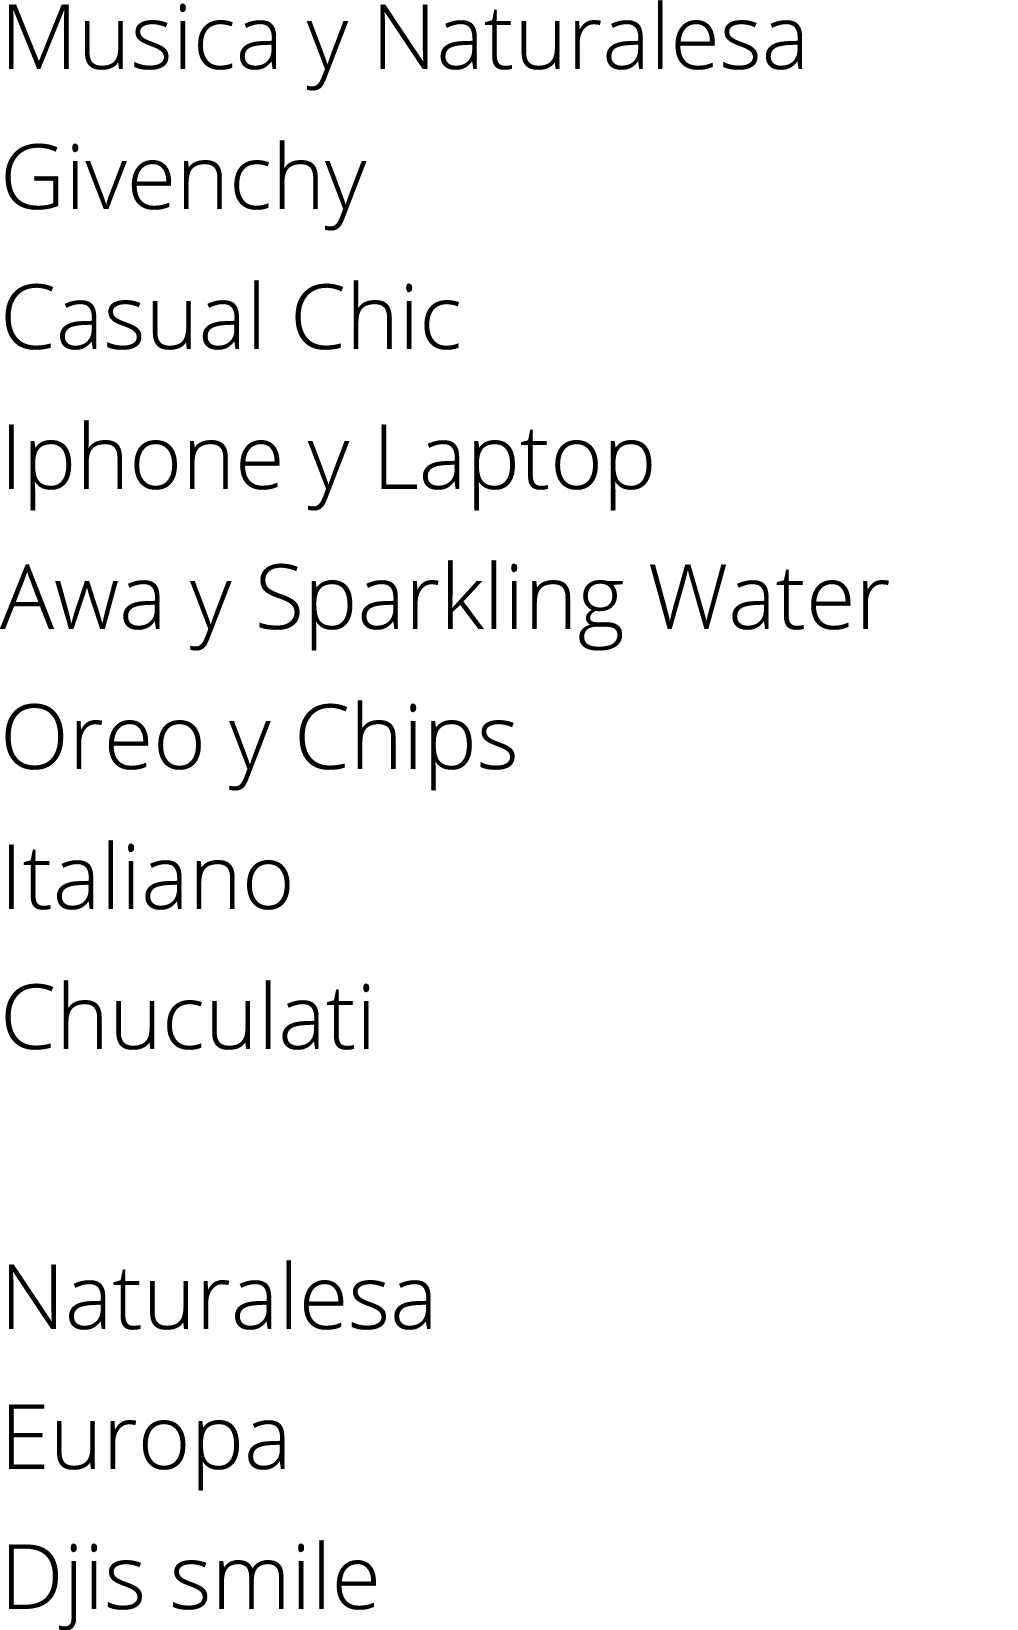 Musica y Naturalesa Givenchy Casual Chic Iphone y Laptop Awa y Sparkling Water Oreo y Chips Italiano Chuculati Natura   